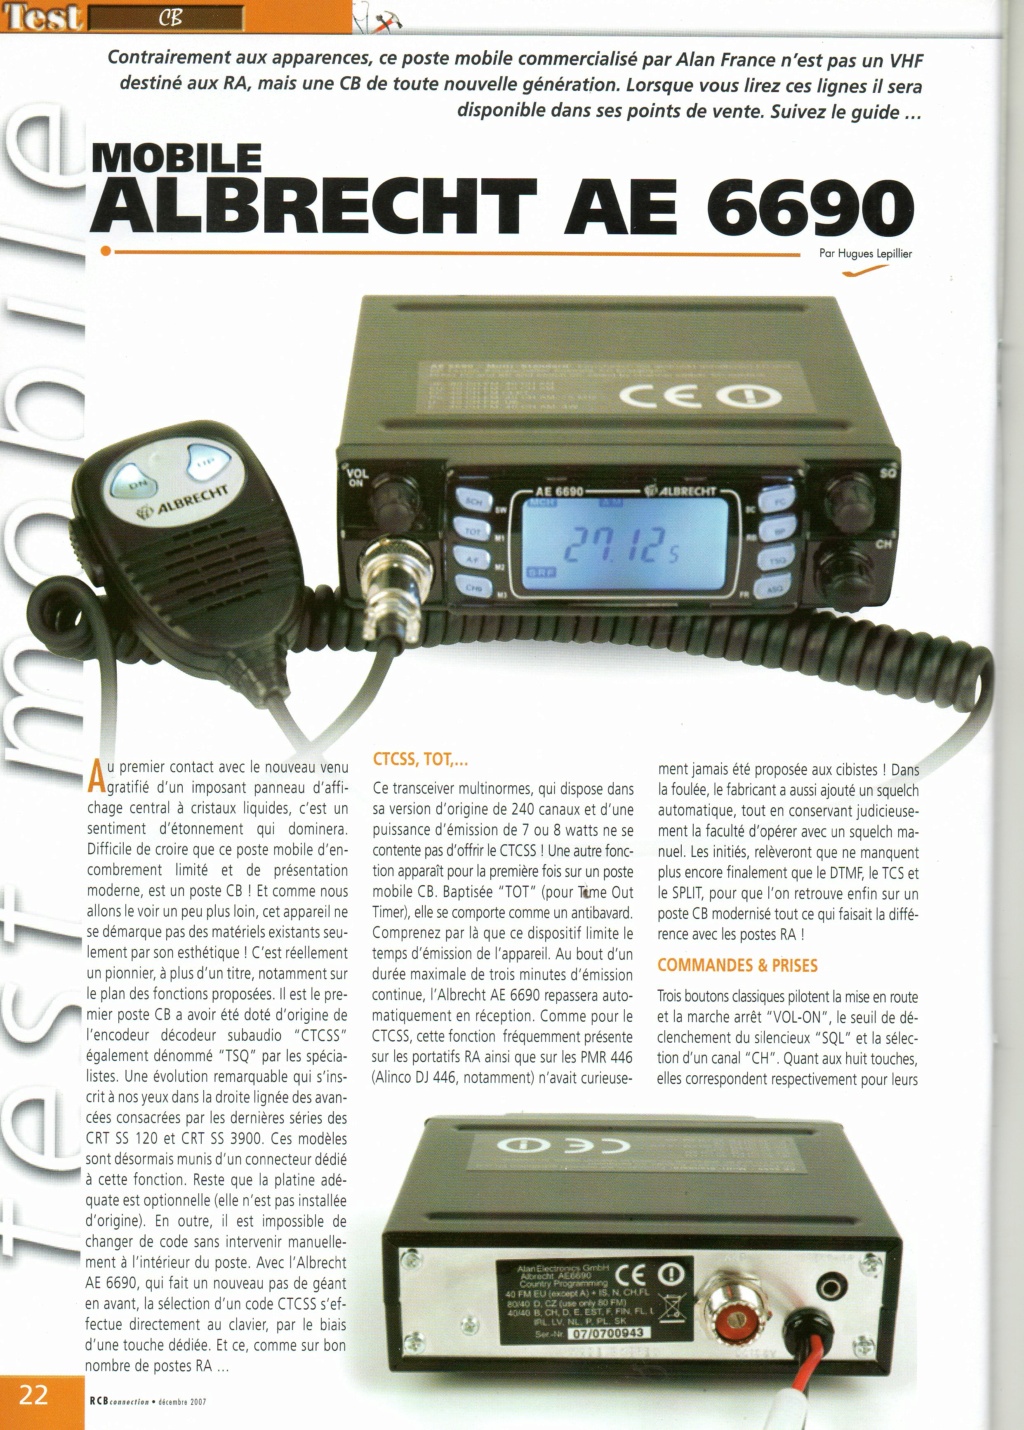 camping-car - Albrecht AE 6690 (Mobile & Camping-car) Img61310